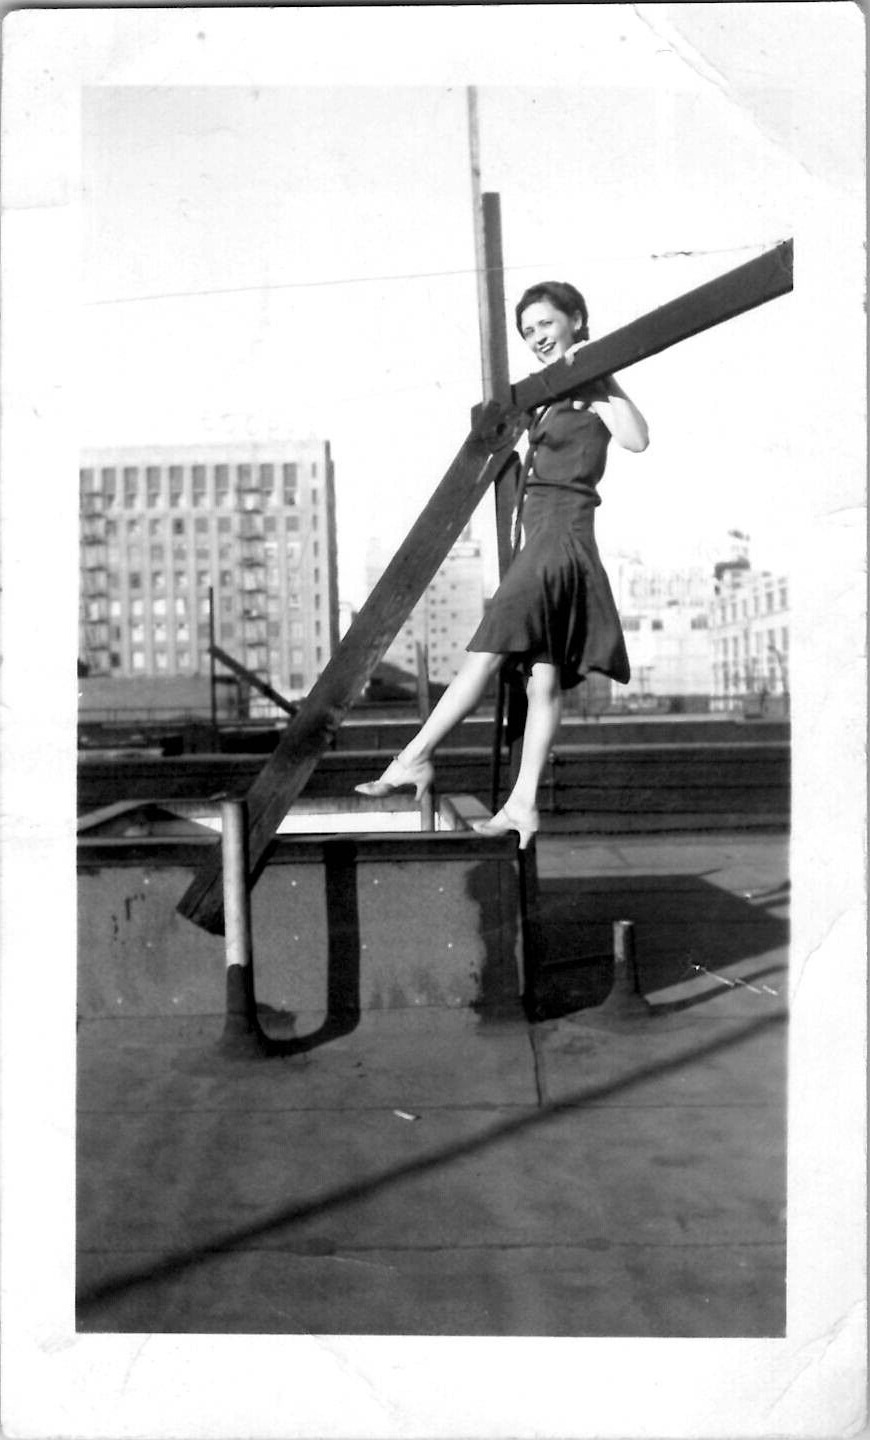 Flirty Babe Woman Showing Off Sexy Legs and Feet Rooftop 1920s Vintage Photo